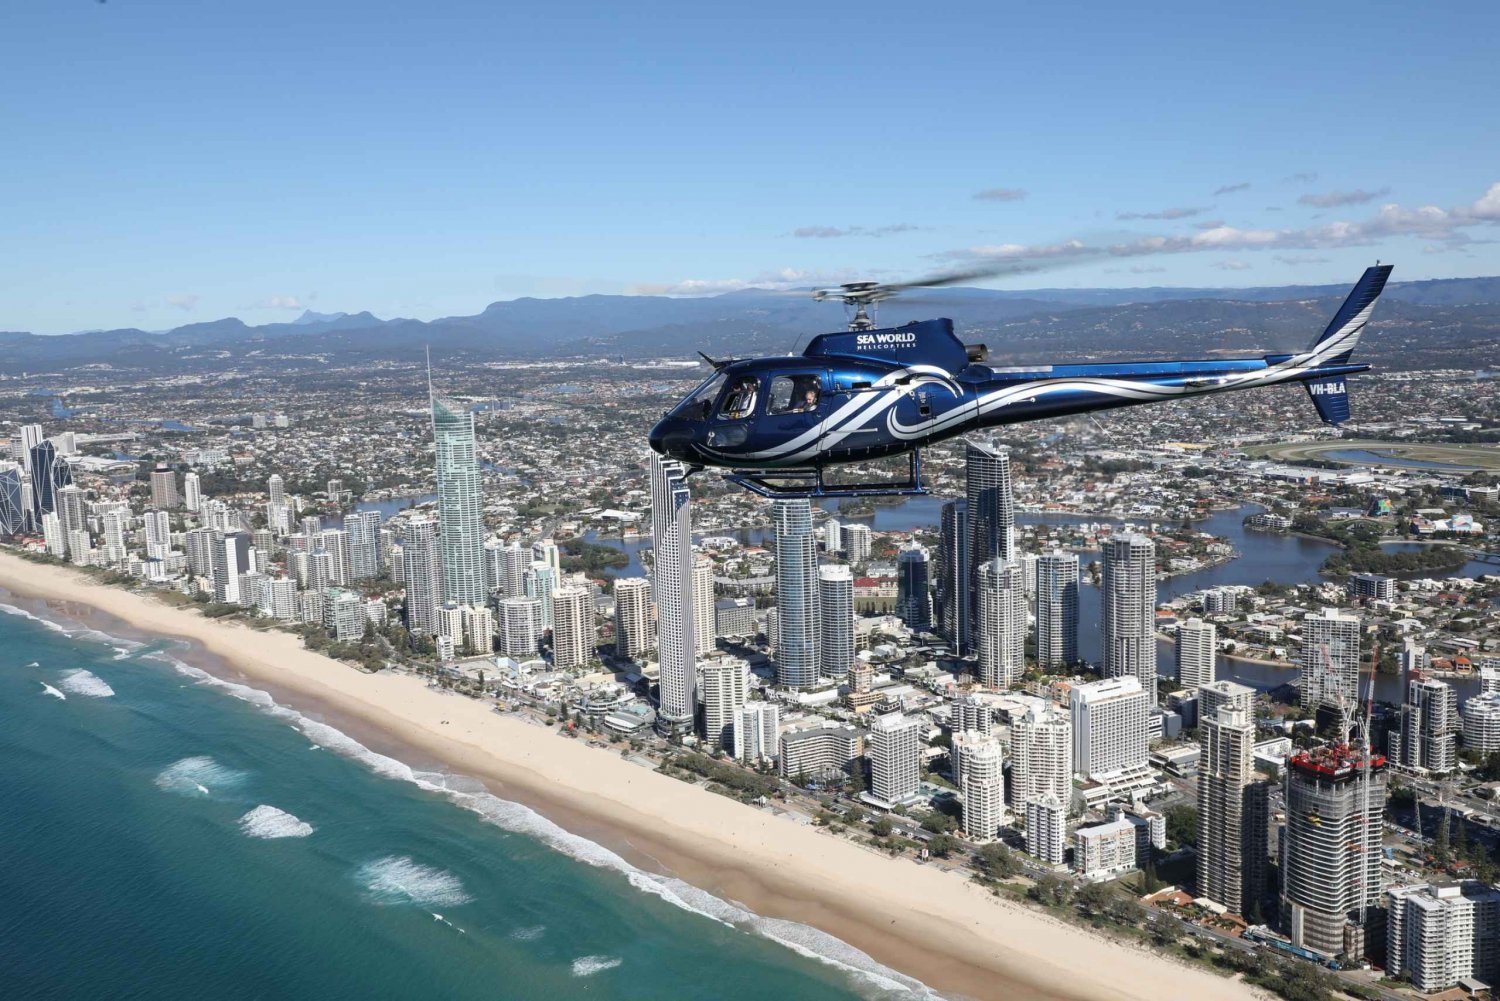 Gold Coast: Sea World and Broadwater Scenic Helicopter Tour